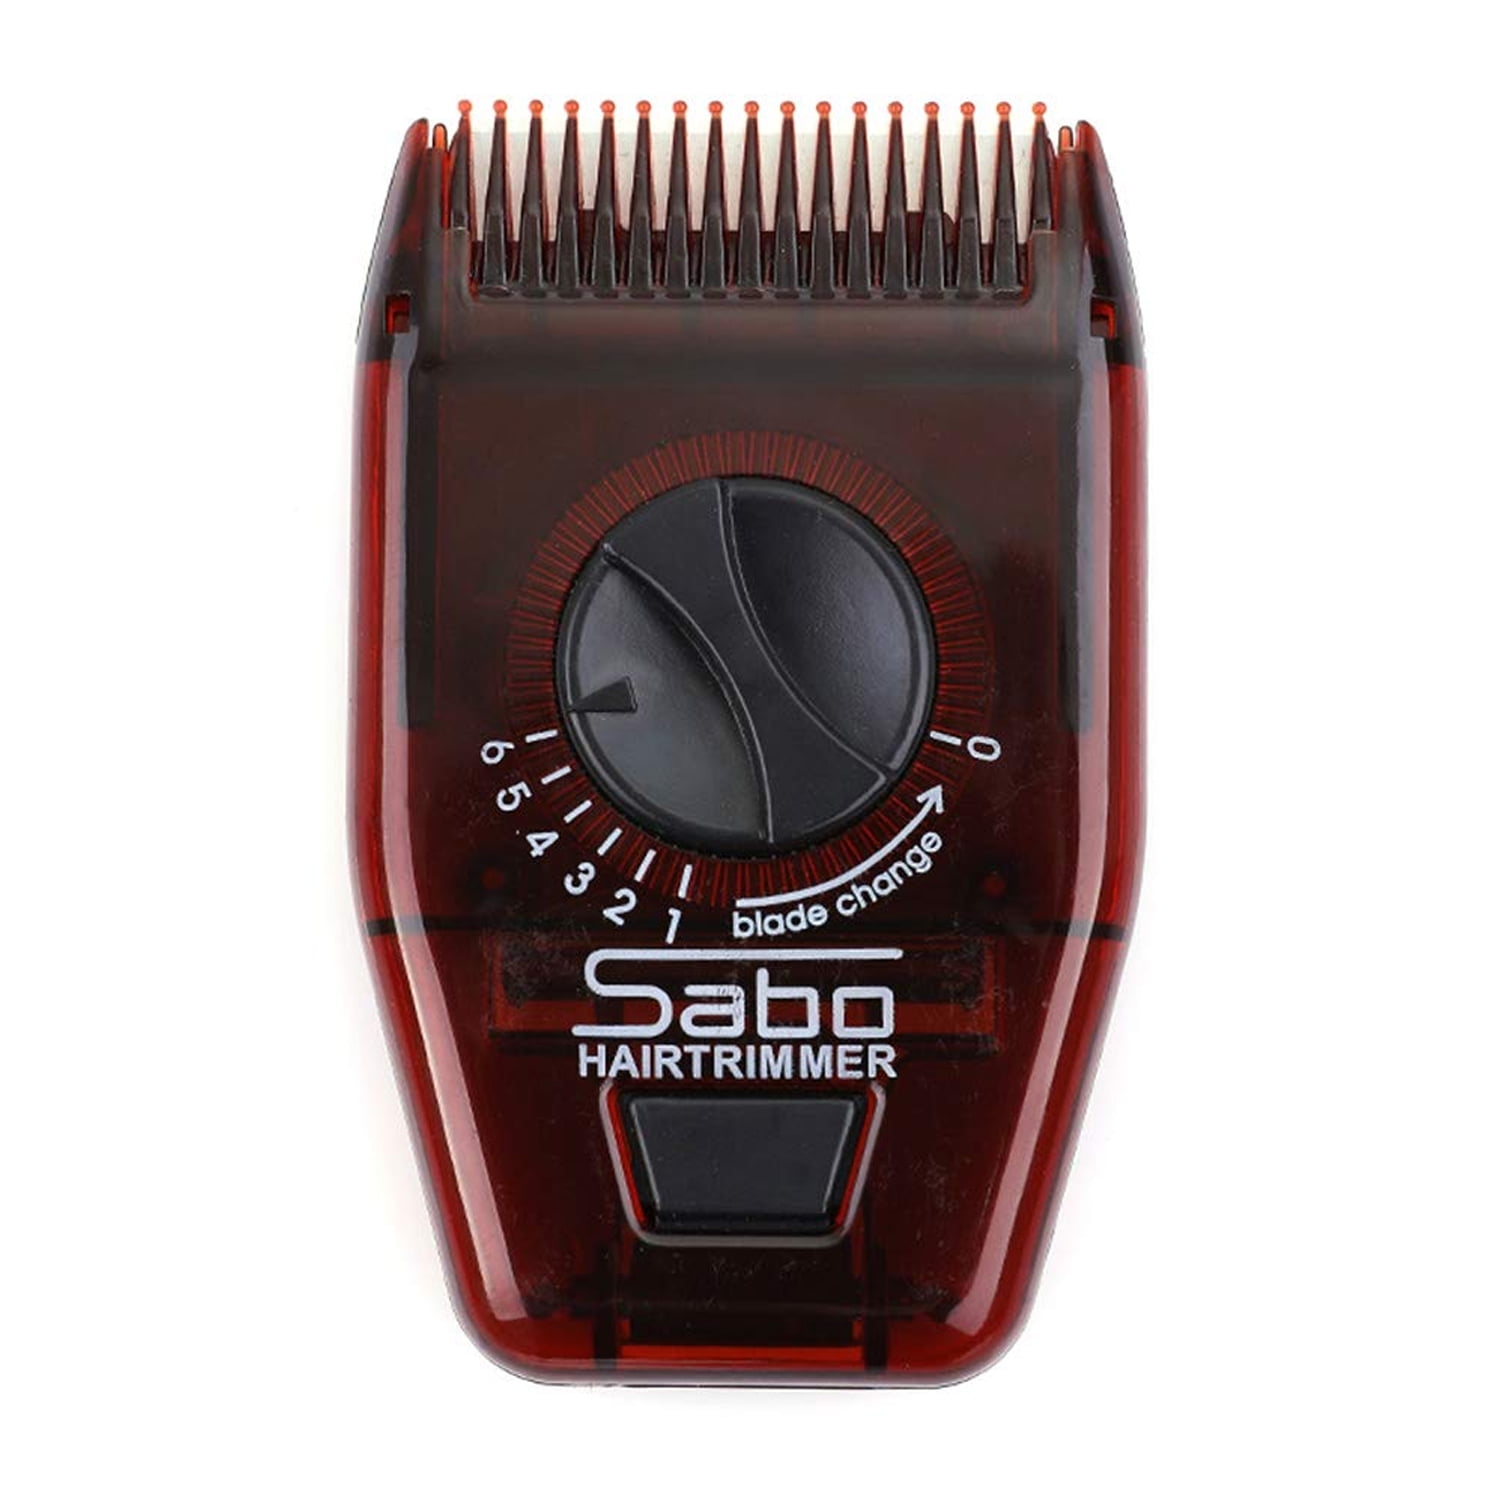 Hair trimming comb